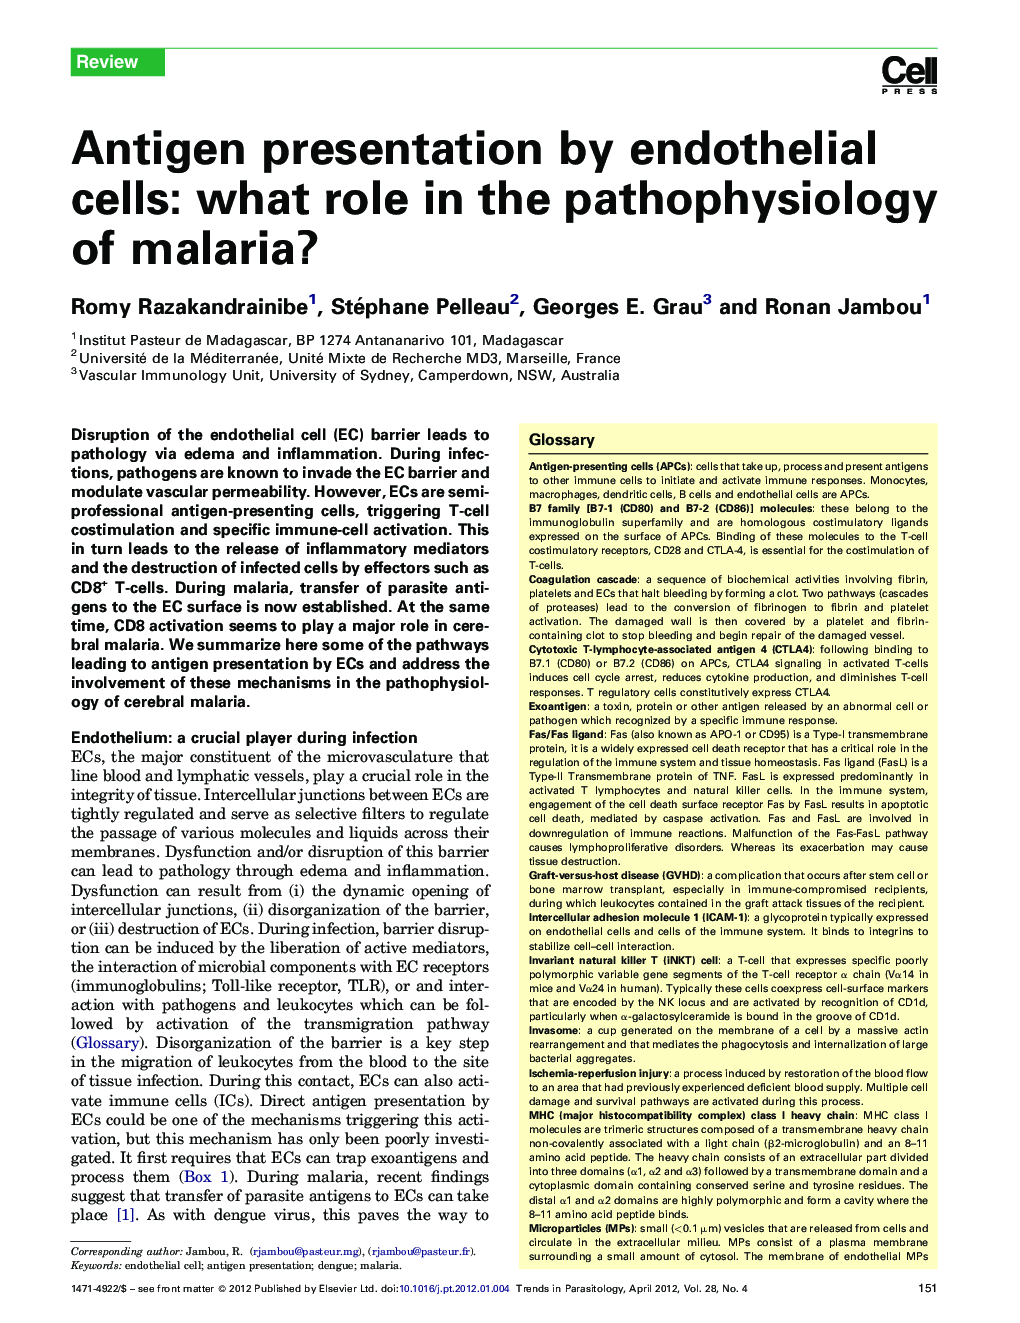 Antigen presentation by endothelial cells: what role in the pathophysiology of malaria?